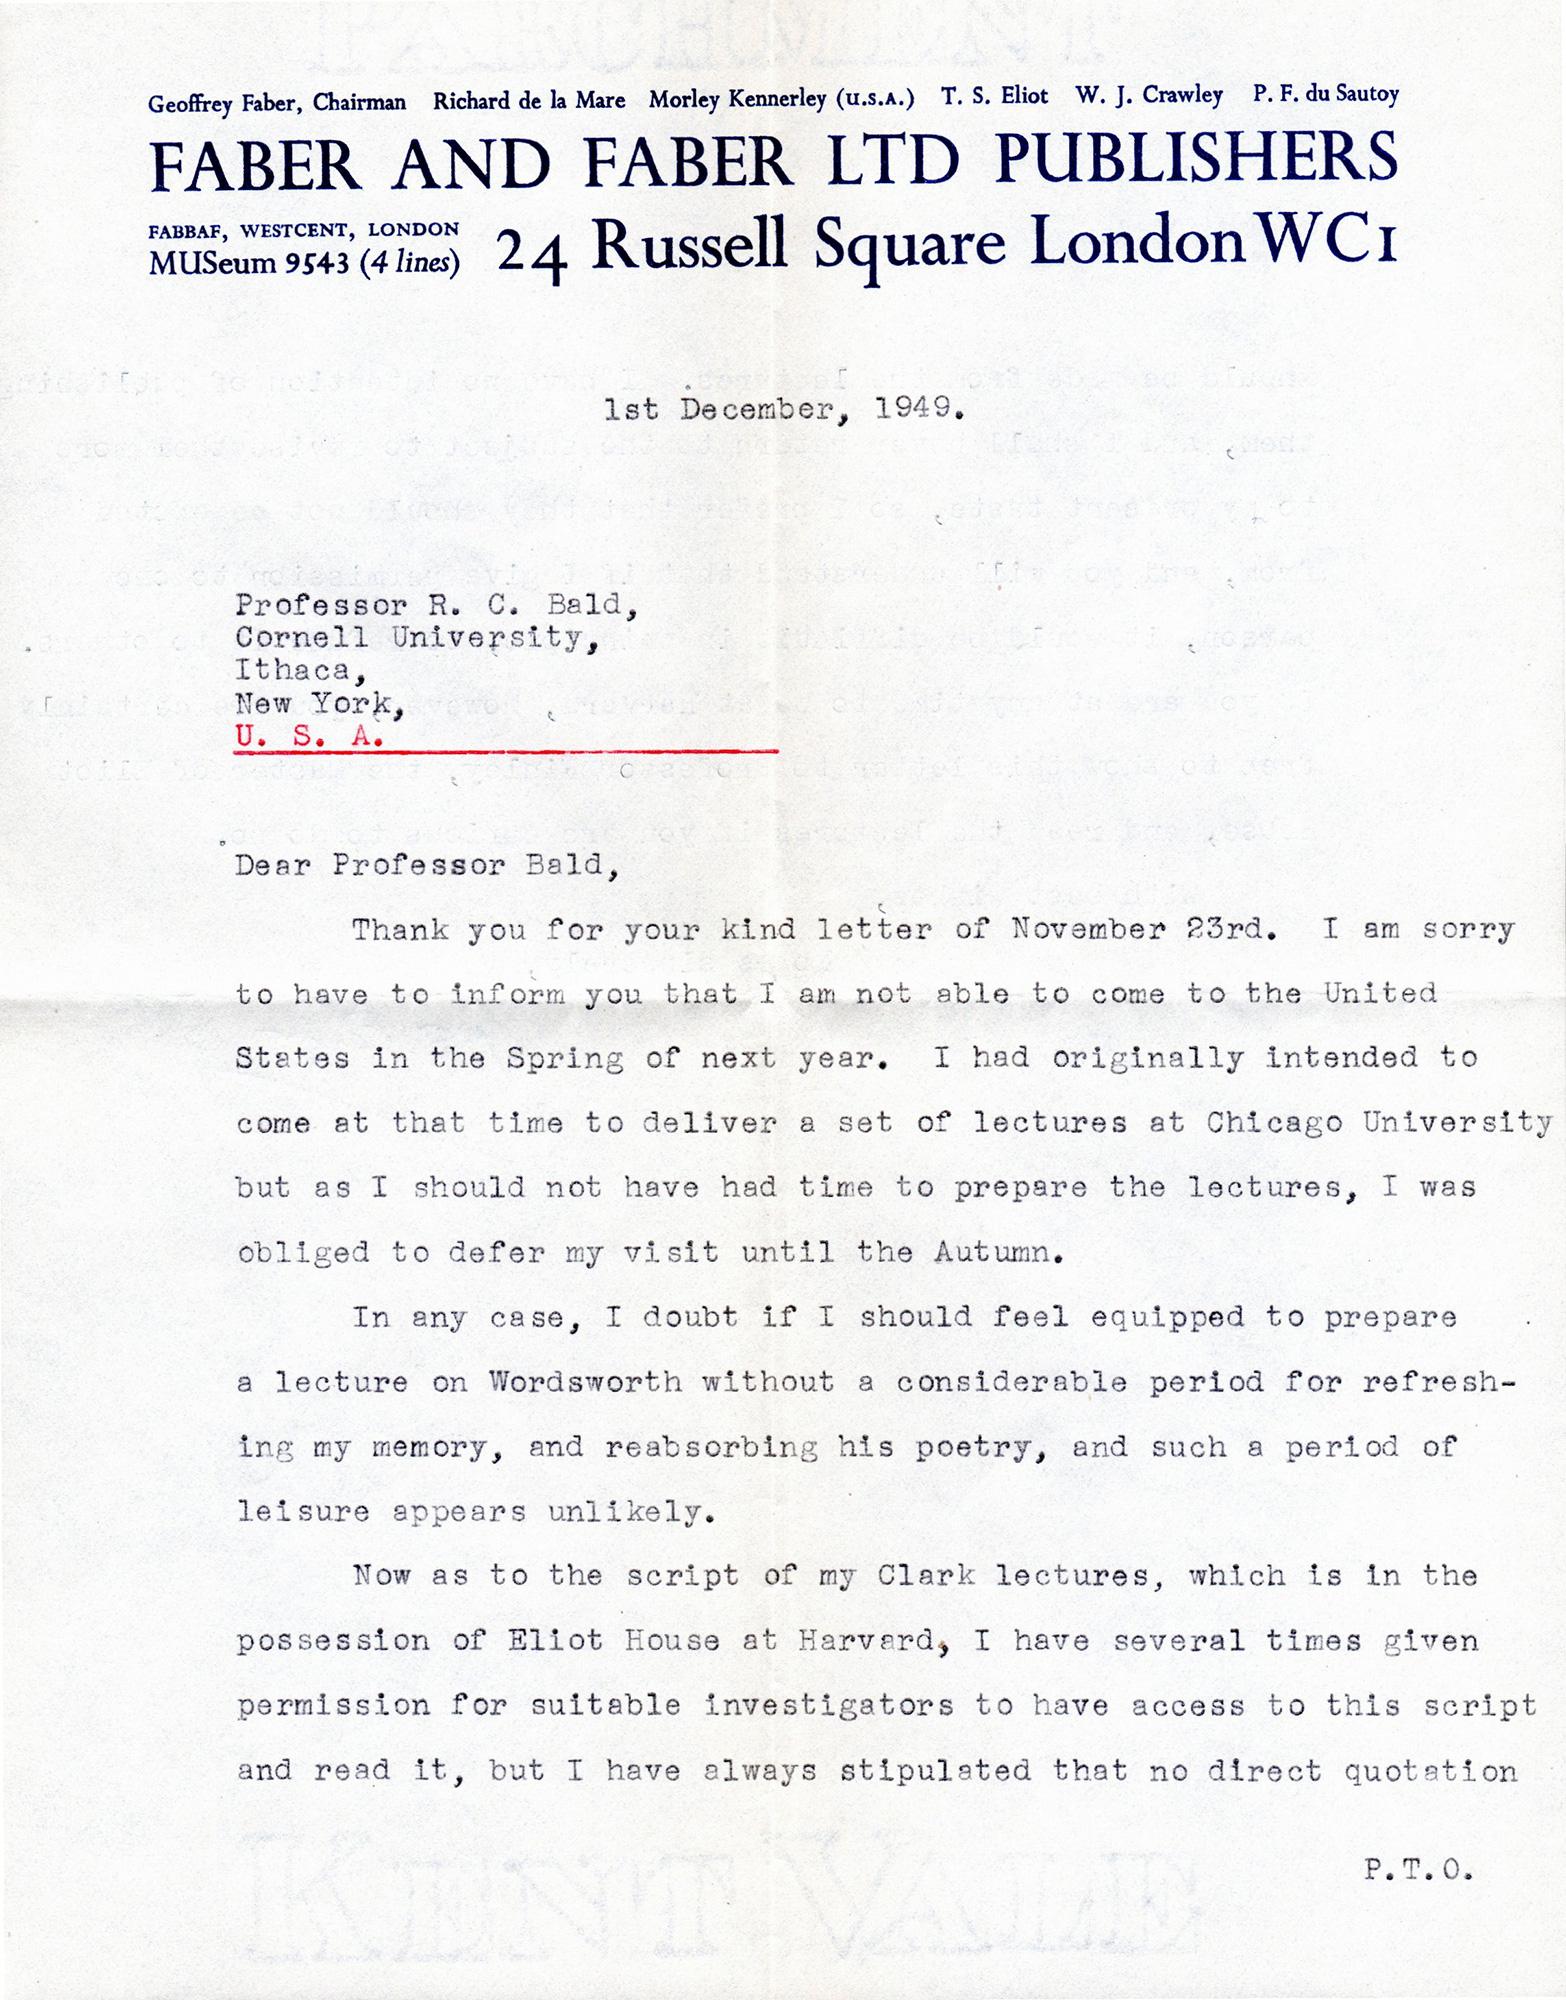 Two one-page letters on Faber & Faber stationery, SIGNED by T. S. Eliot.  The first, dated 1 December 1949 is double sided, 10 1/4 x 8 inches (266 x 204 mm) in envelope 4 1/4 x 5 1/4 inches (110 x 133 mm). The second is dated 23 August 1950, one